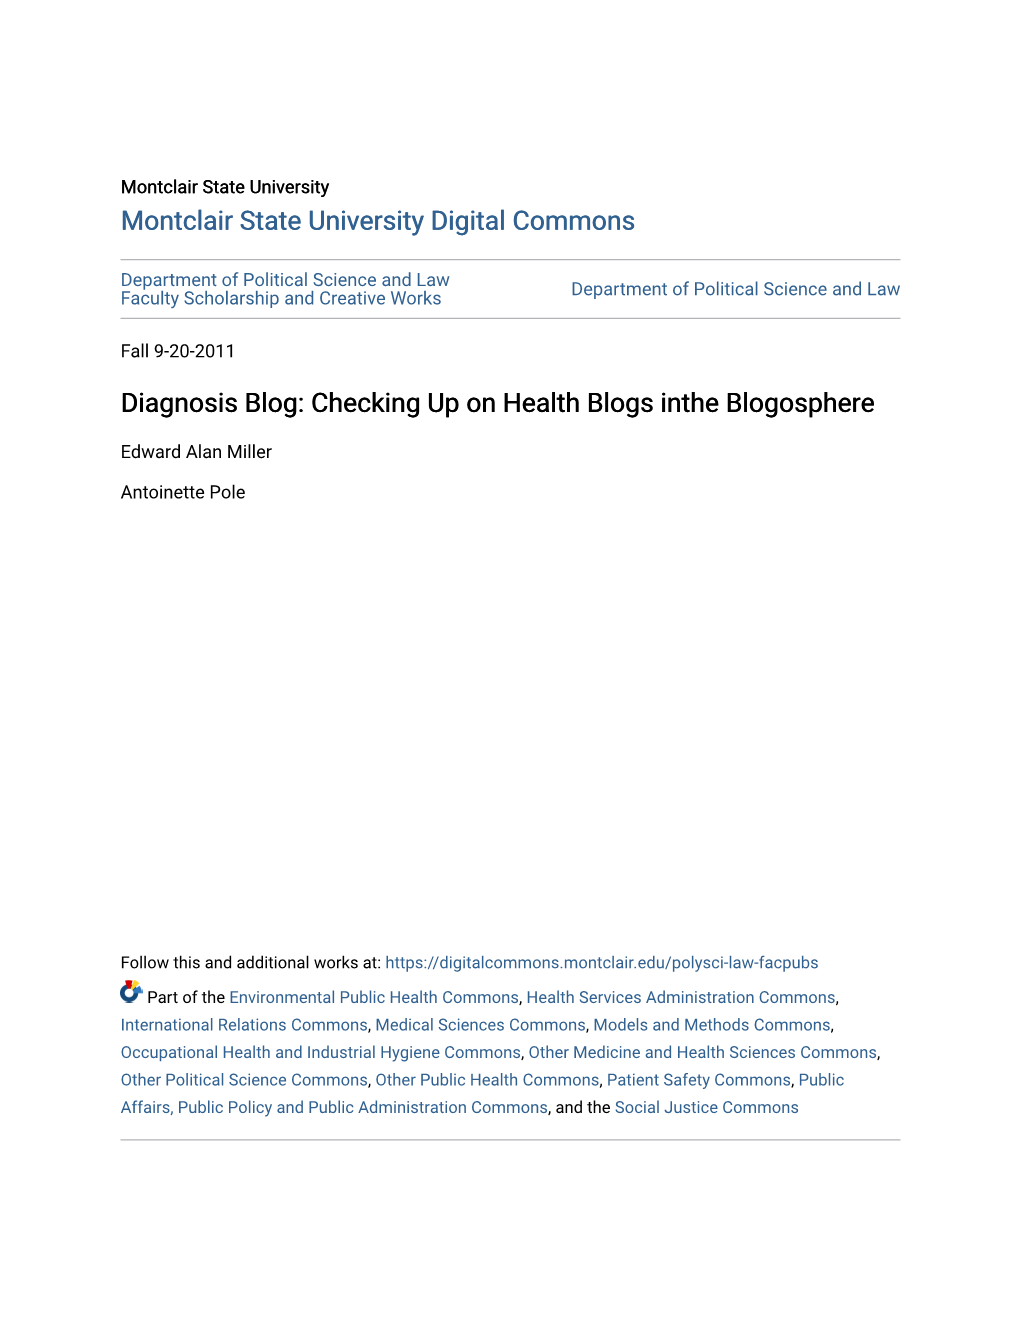 Diagnosis Blog: Checking up on Health Blogs Inthe Blogosphere